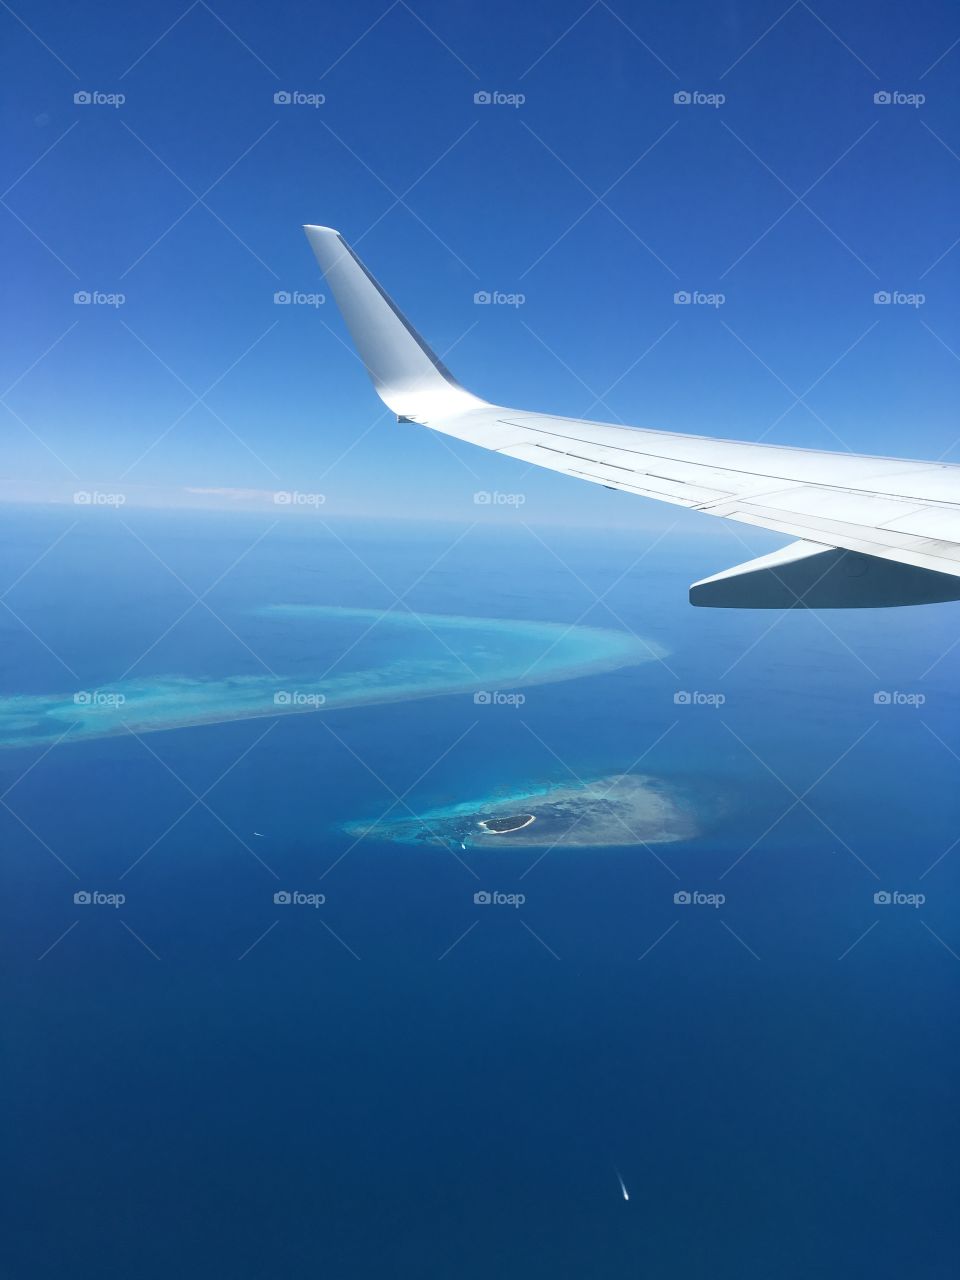 Plane wing over a reef